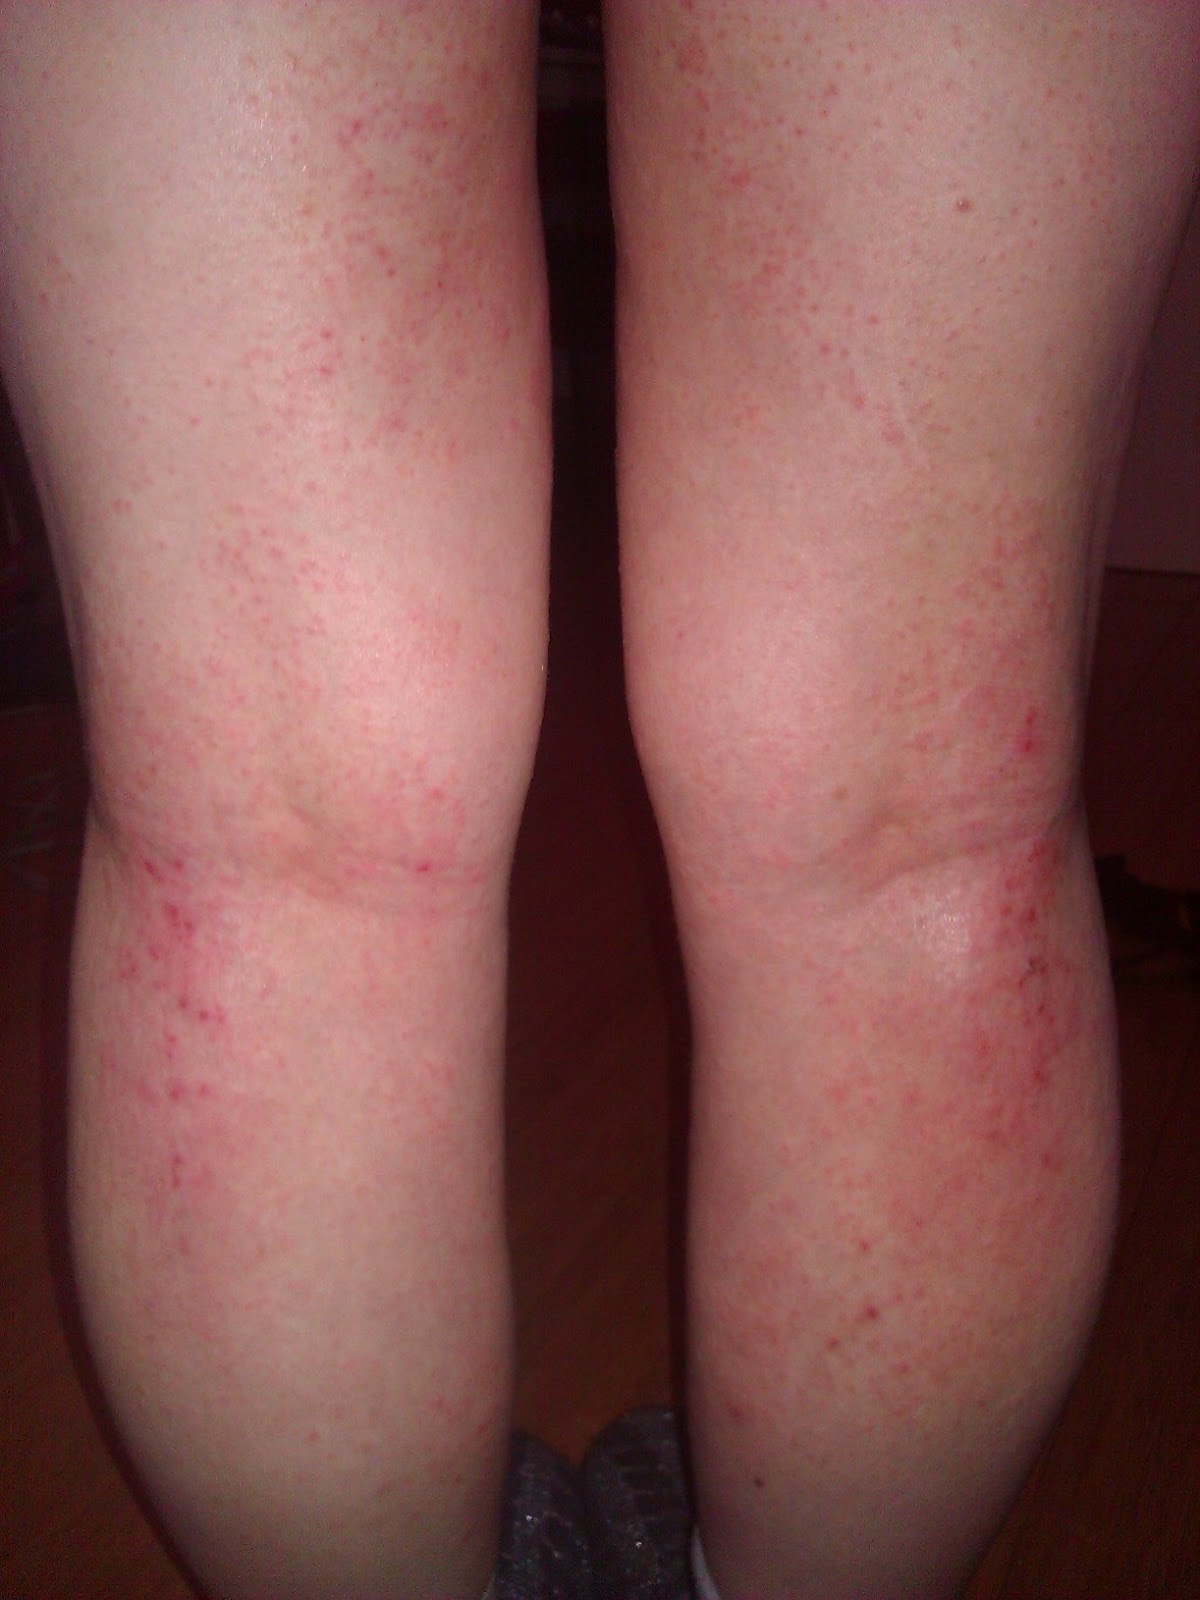 I Have Eczema: Topical Steroid Withdrawal